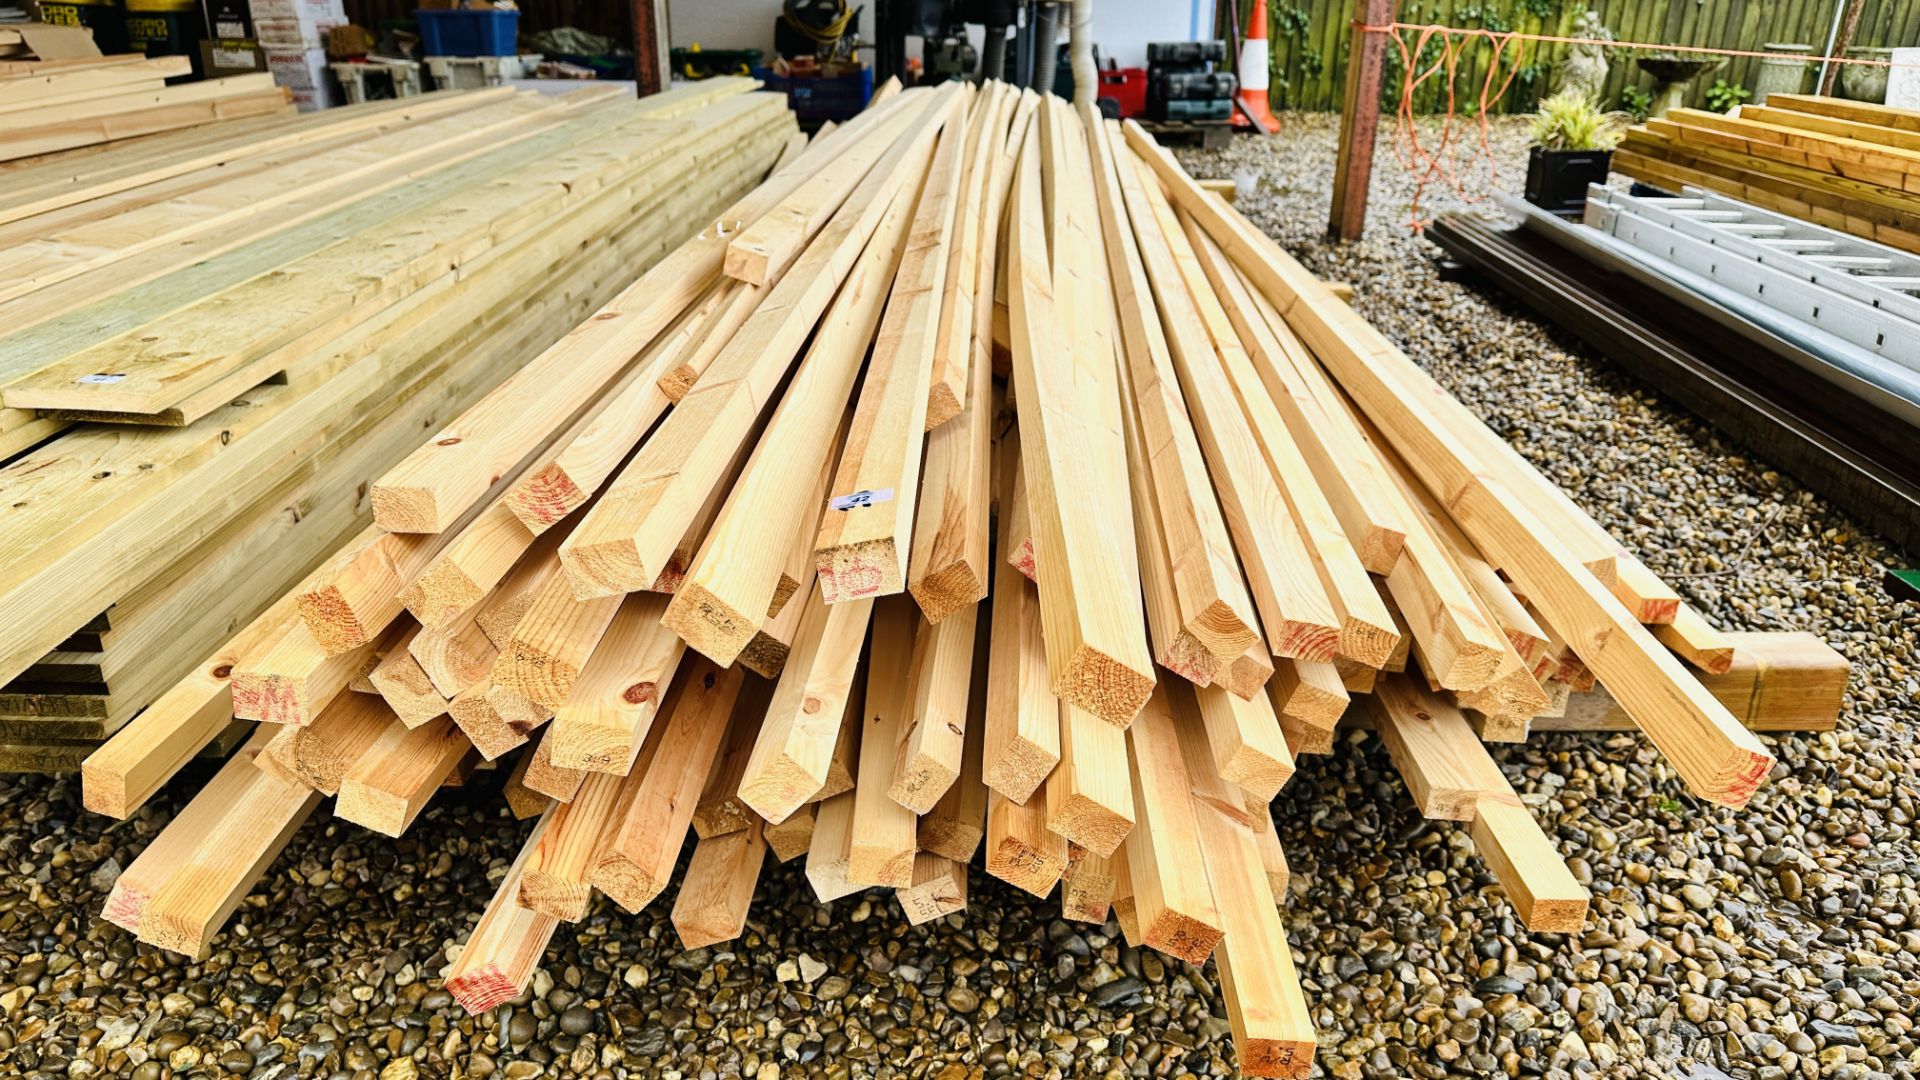 APPROX 150 LENGTHS OF 45MM X 35MM PLANED TIMBER AVERAGE LENGTH 4 METRE.